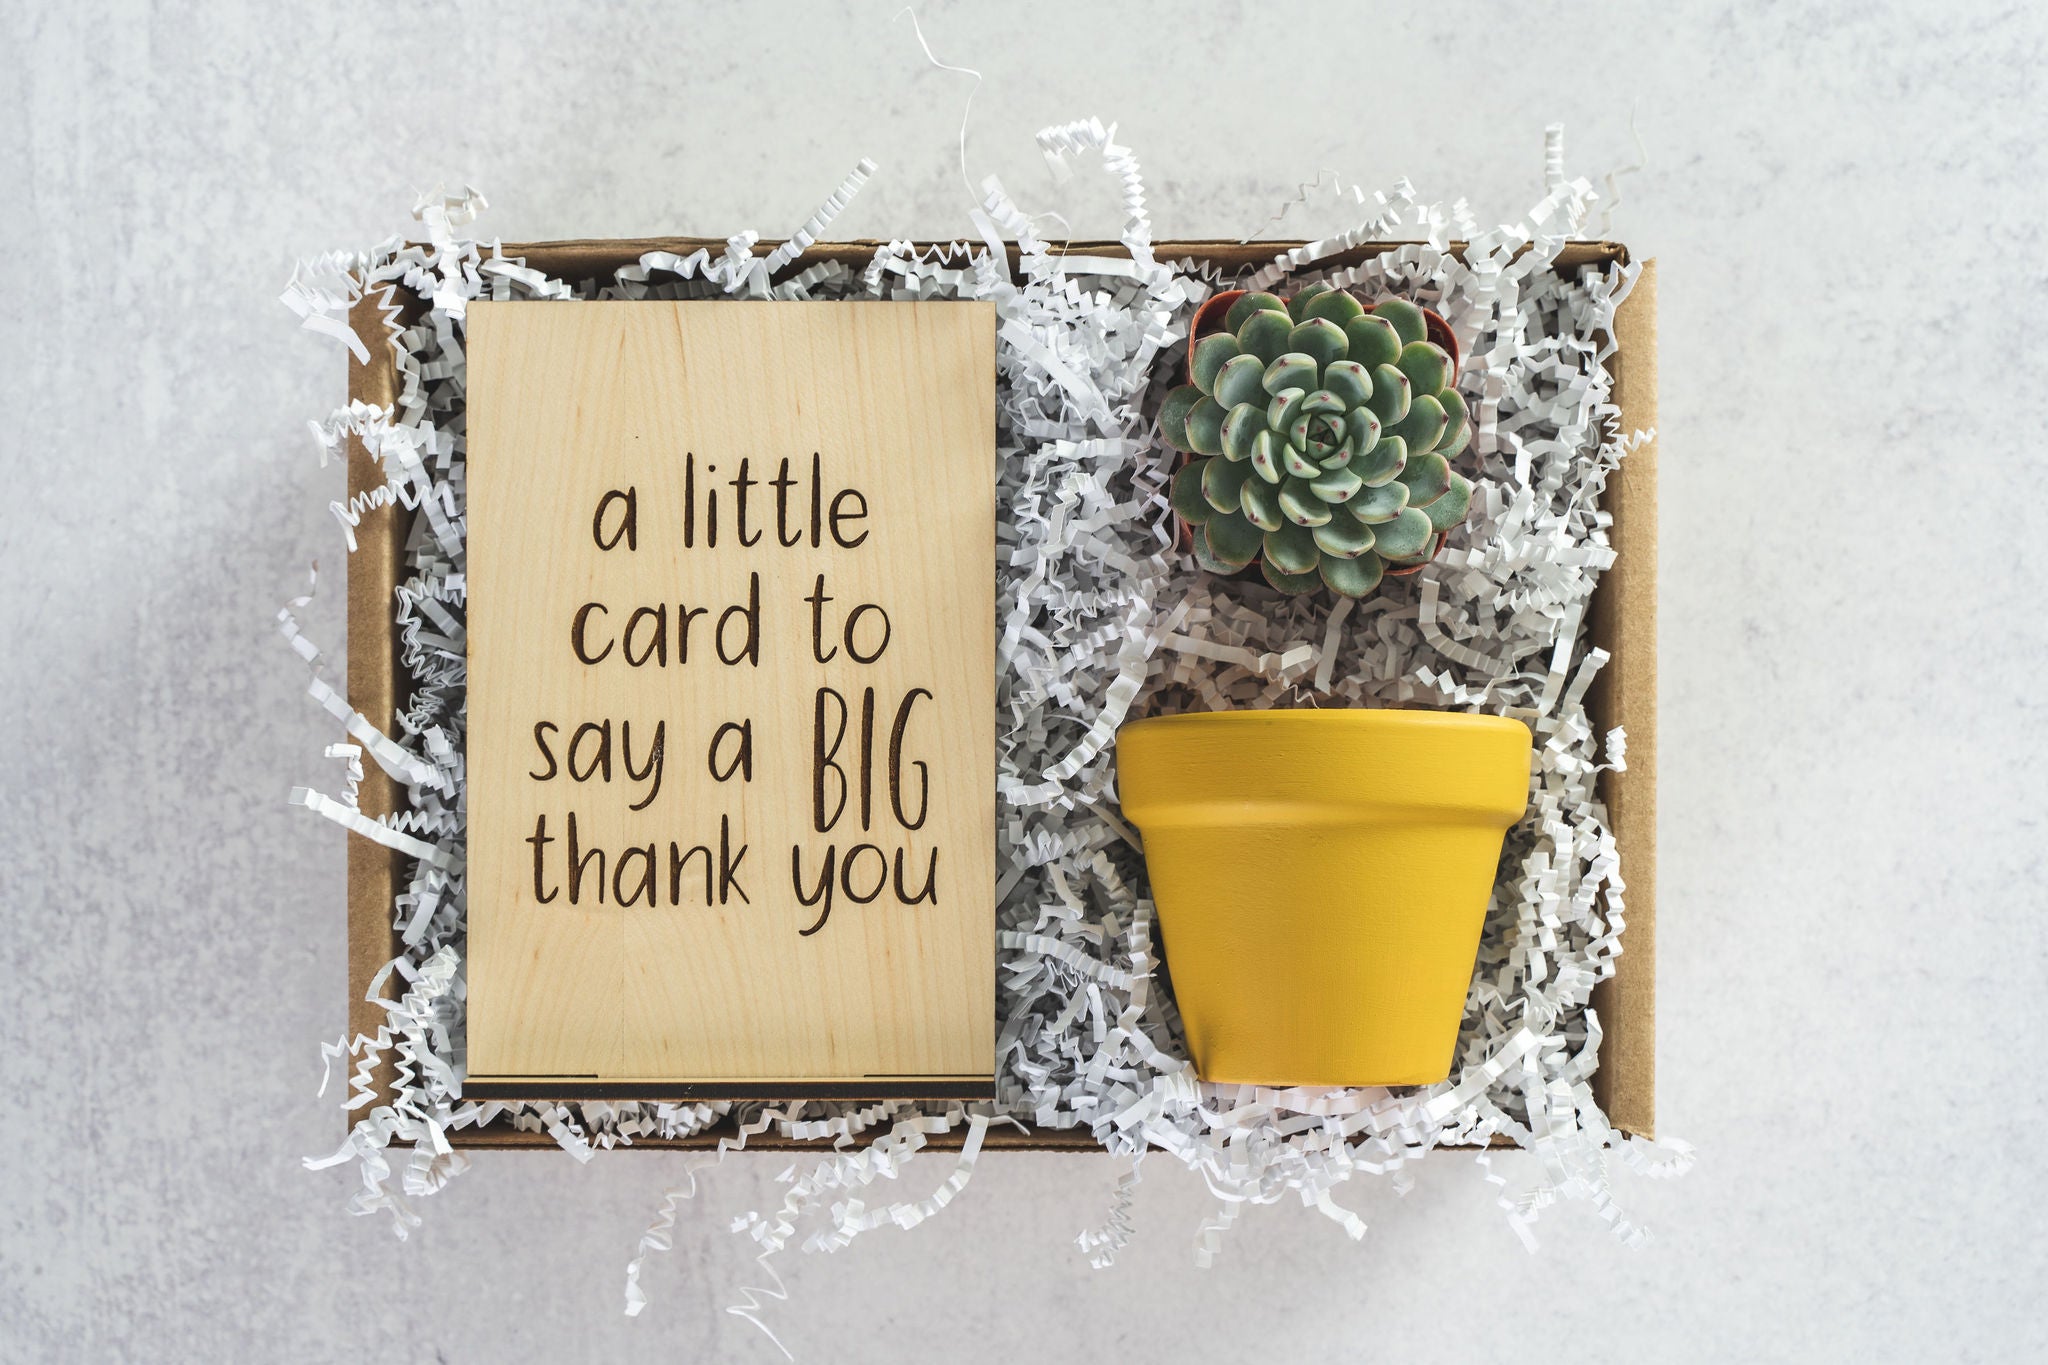 How to Say Thank You for All Your Holiday Gifts | LoveToKnow